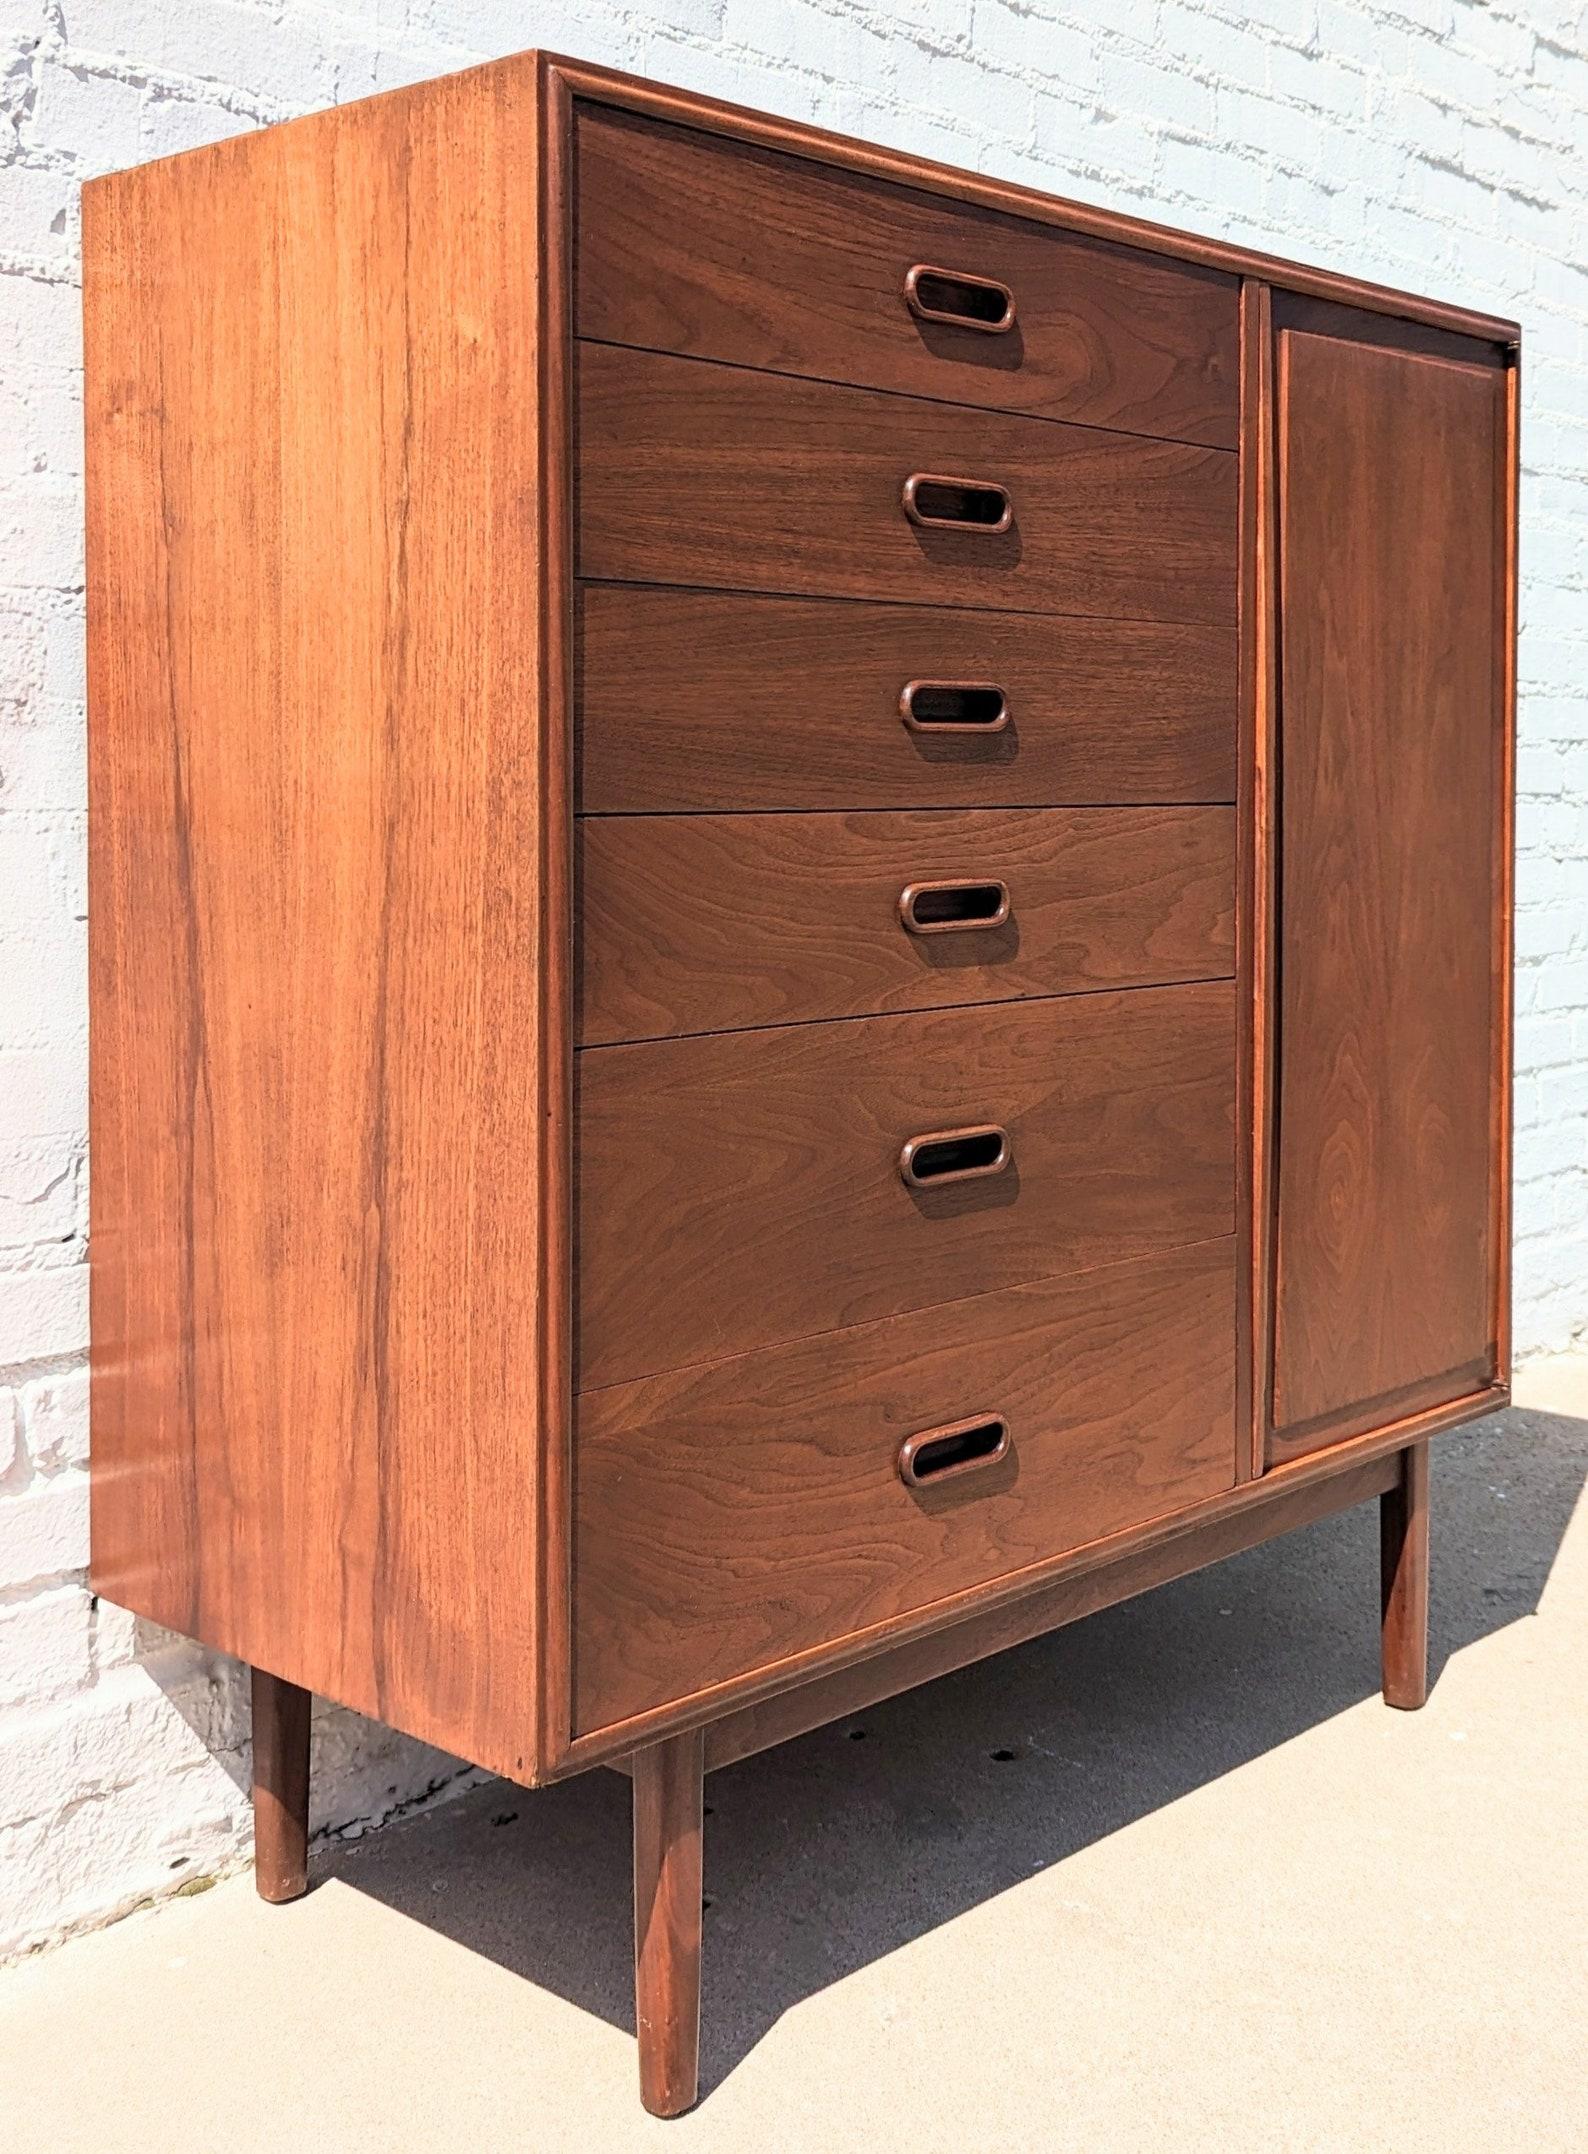 Mid Century Modern Walnut Cabinet by Jack Cartwright for Founders

Above average vintage condition and structurally sound. Has some expected slight finish wear and scratching. Has a couple small dings around edges. Outdoor listing pictures might